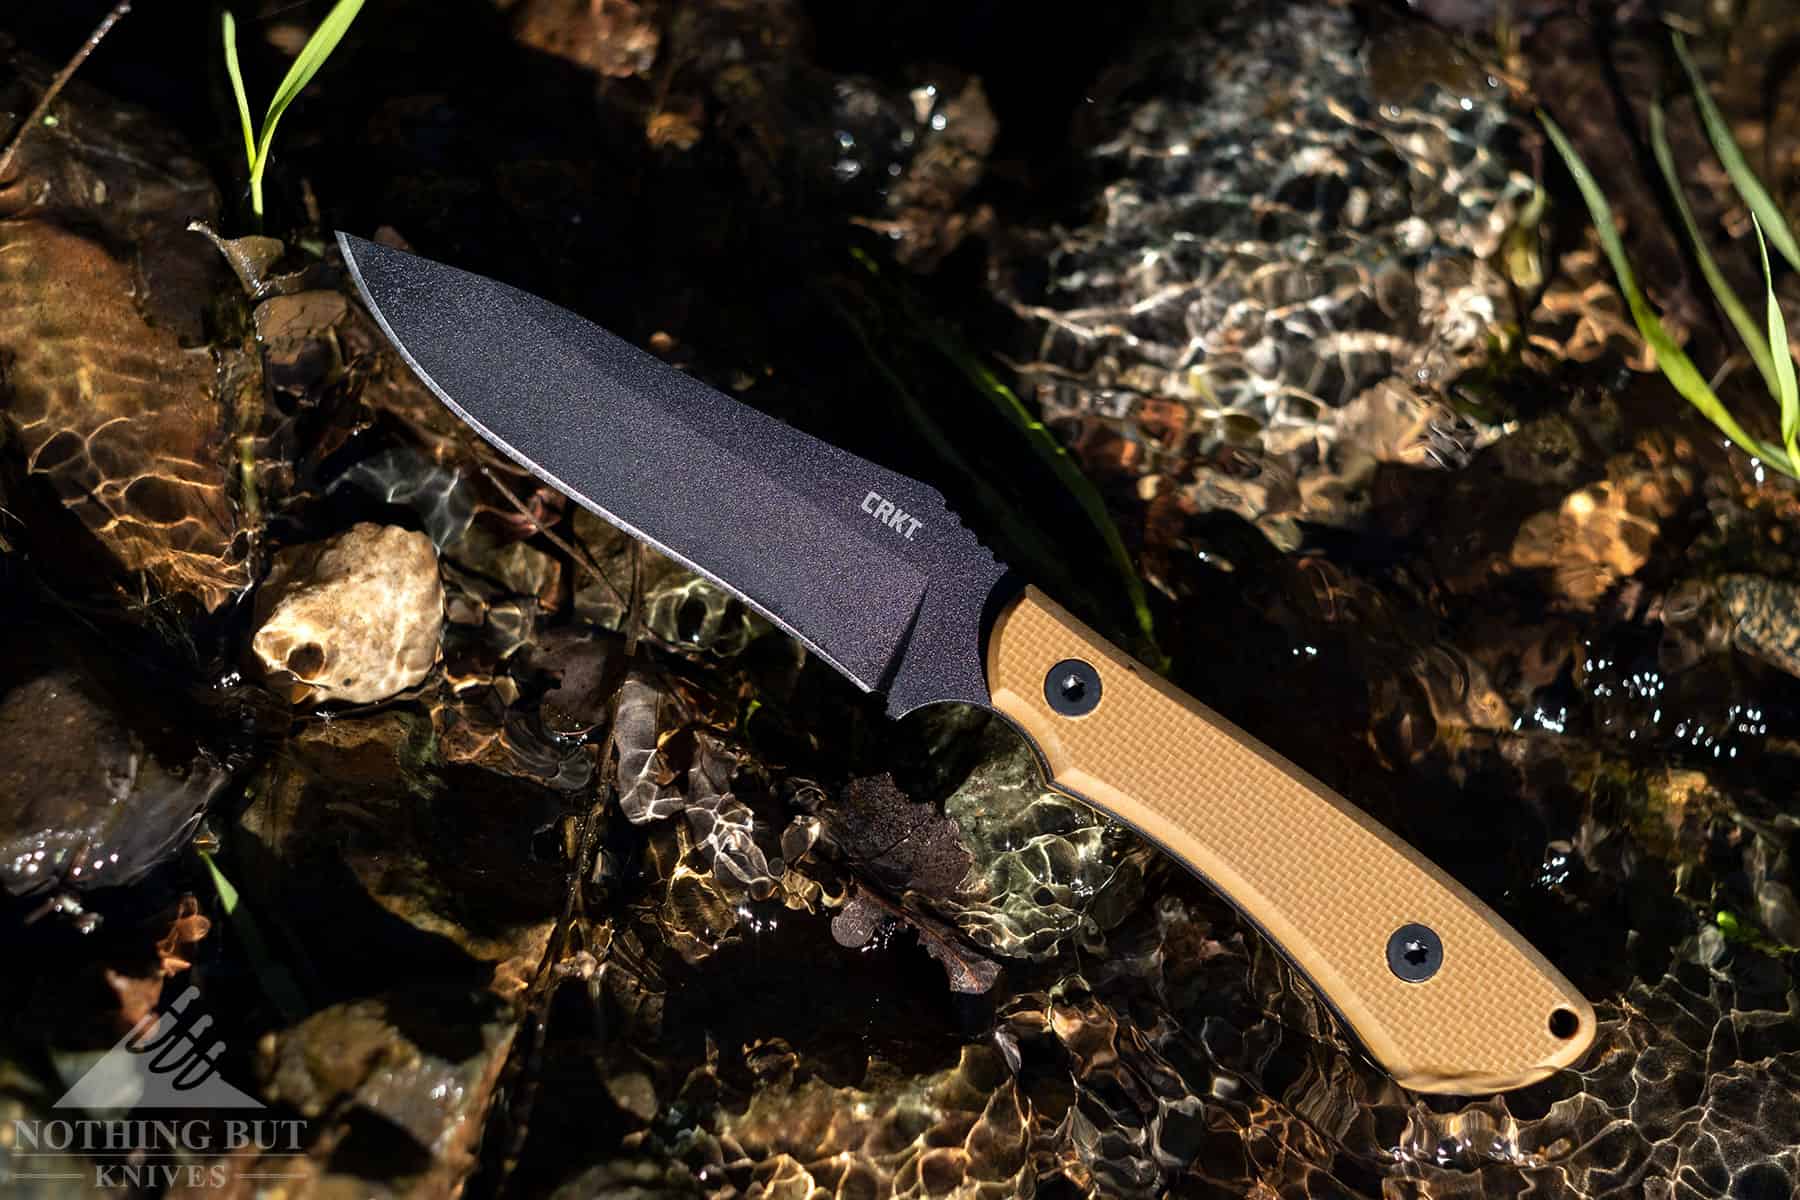 The CRKT Ramadi is a tactical, survival knife hybrid with a high carbon steel blade that holds it's edge really well. 